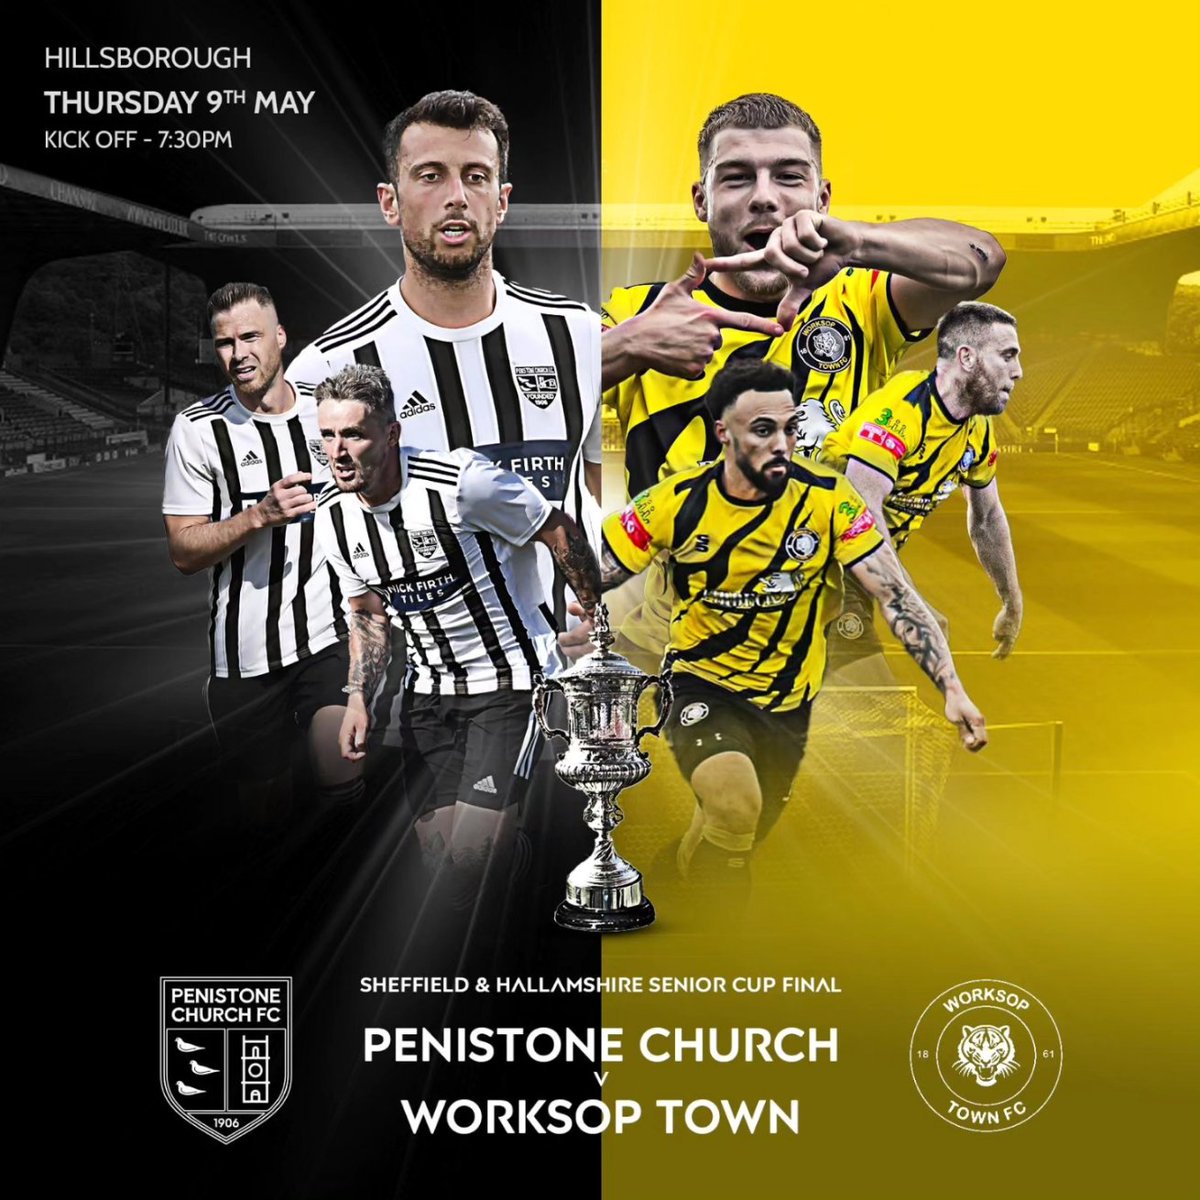 1 week to go before we are in @SHCFA Senior Cup Final action. We take on @worksoptownfc at Hillsborough on Thursday May 9th in what we know will be a tough test but the lads can't wait to get into it. We'd love as many fans to get behind the lads 🤞🤞 #UpTheChurch